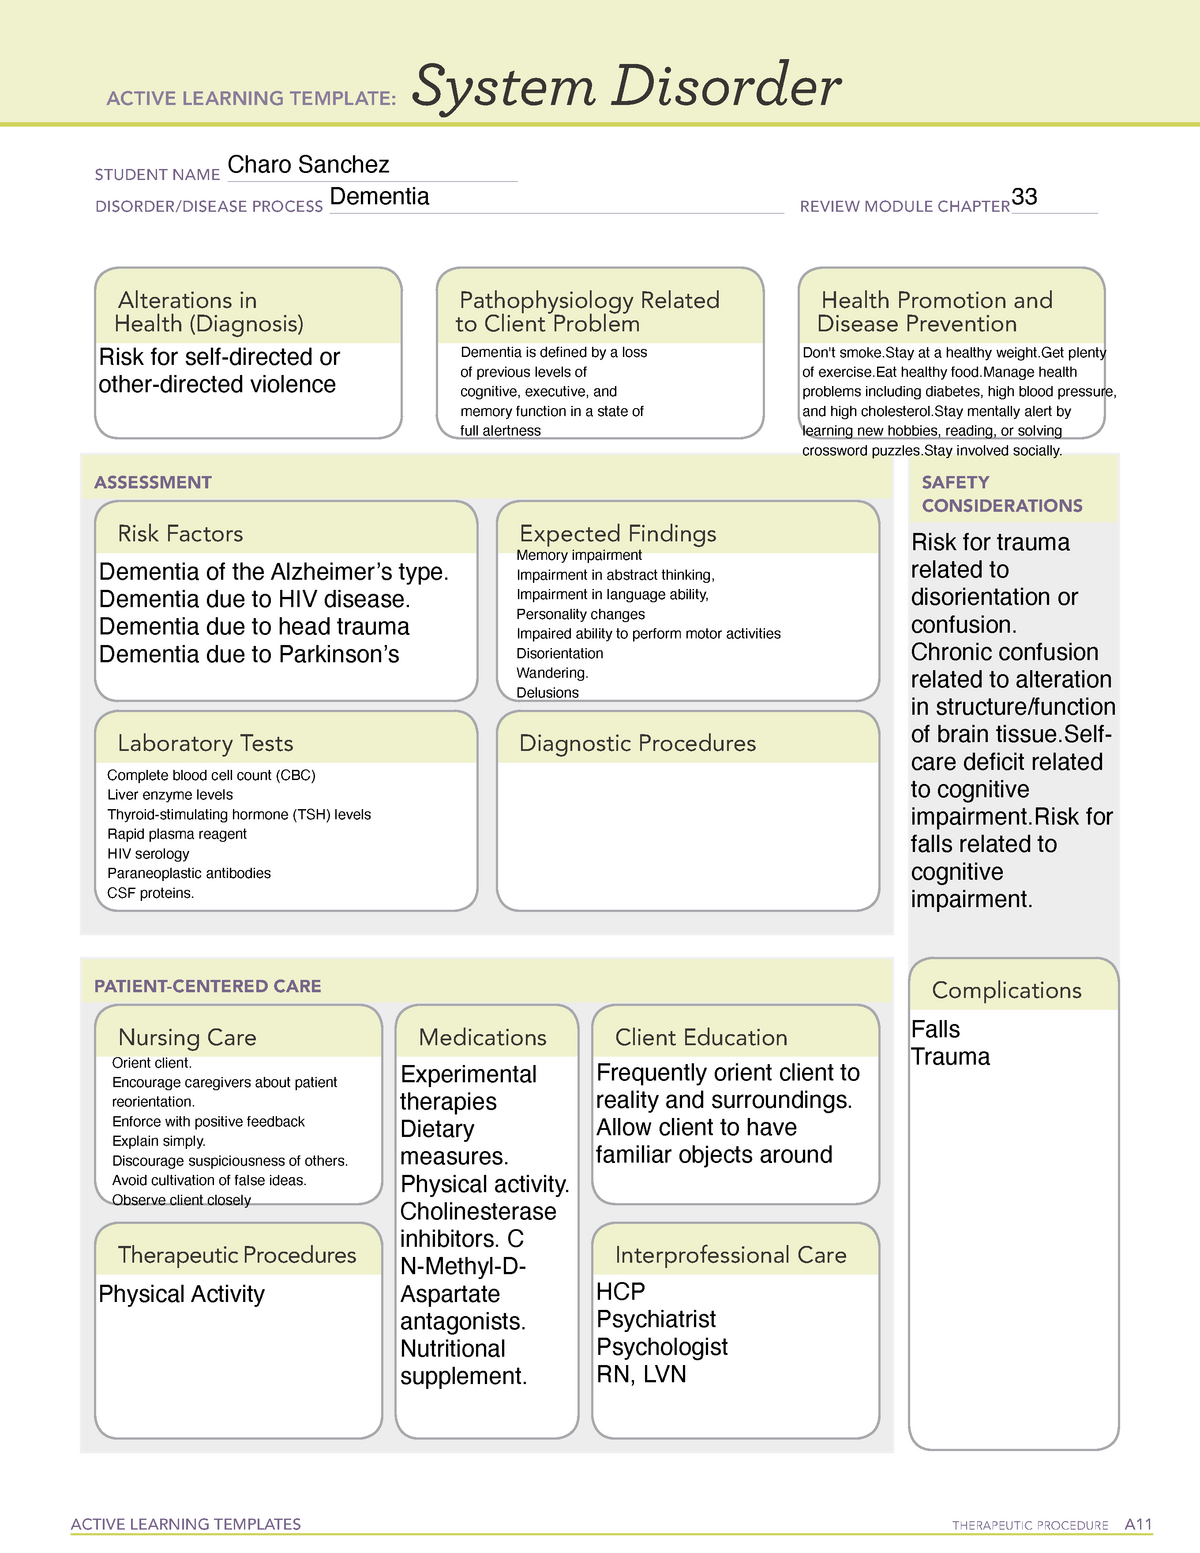 dementia-system-disorder-template